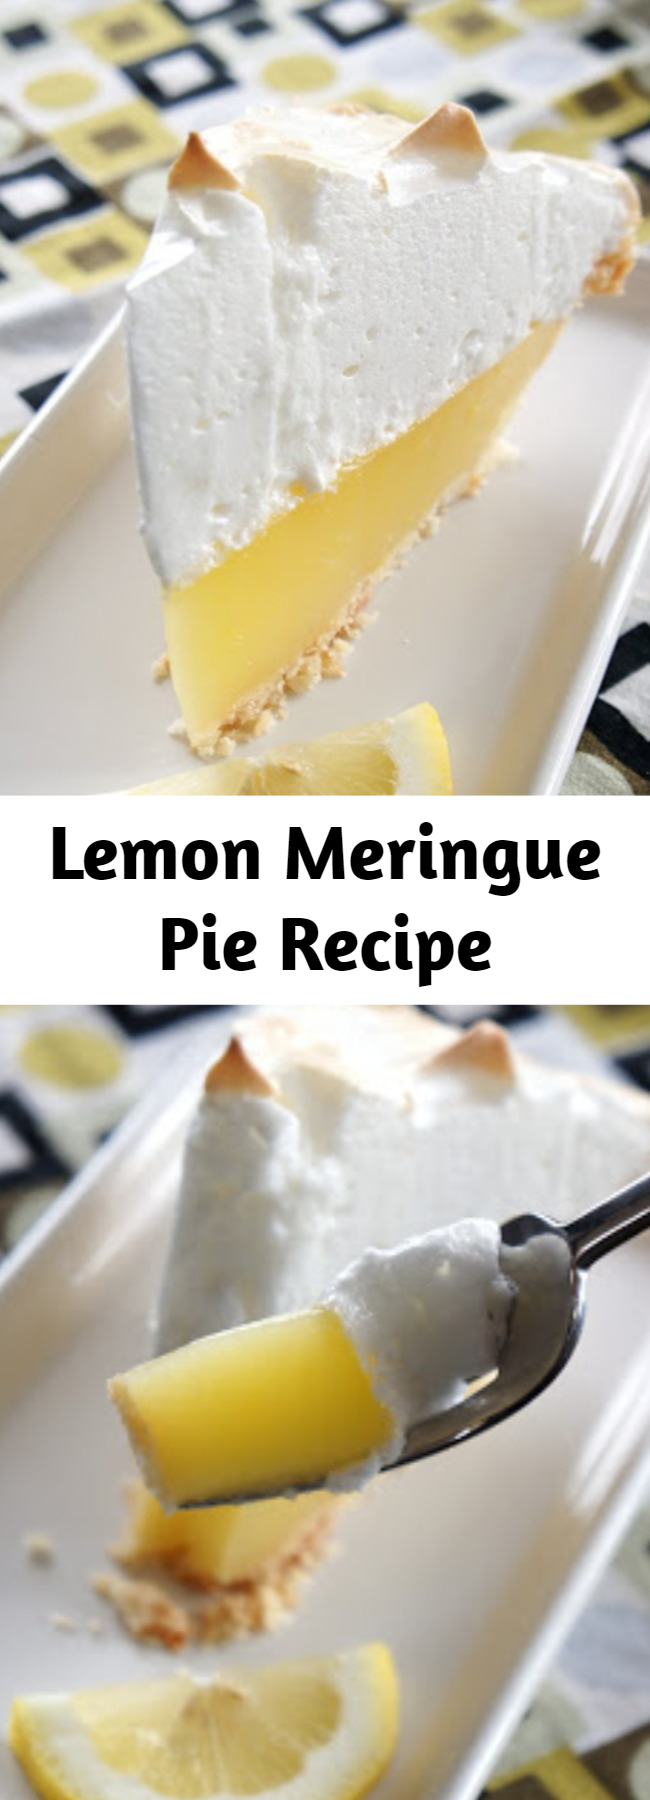 Lemon Meringue Pie Recipe - The best, no fail, lemon meringue pie. The meringue stays fluffy and does not pull away from the crust. The filling does not get runny, it stays perfectly together when you slice the pie.